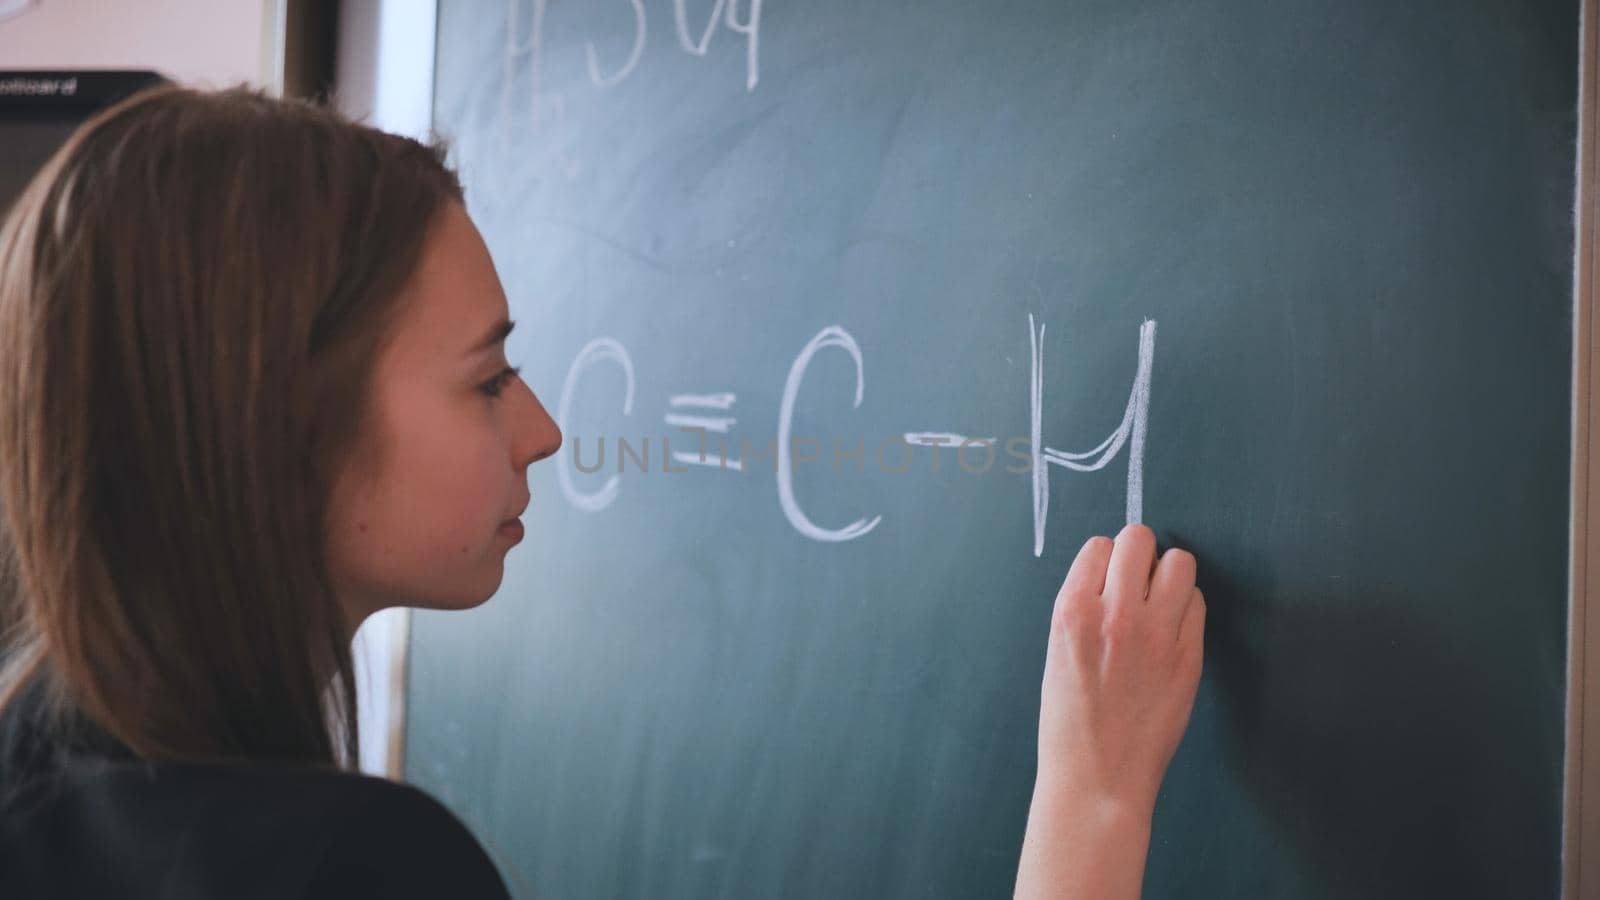 The girl is writing a chemical formula on the blackboard in the classroom